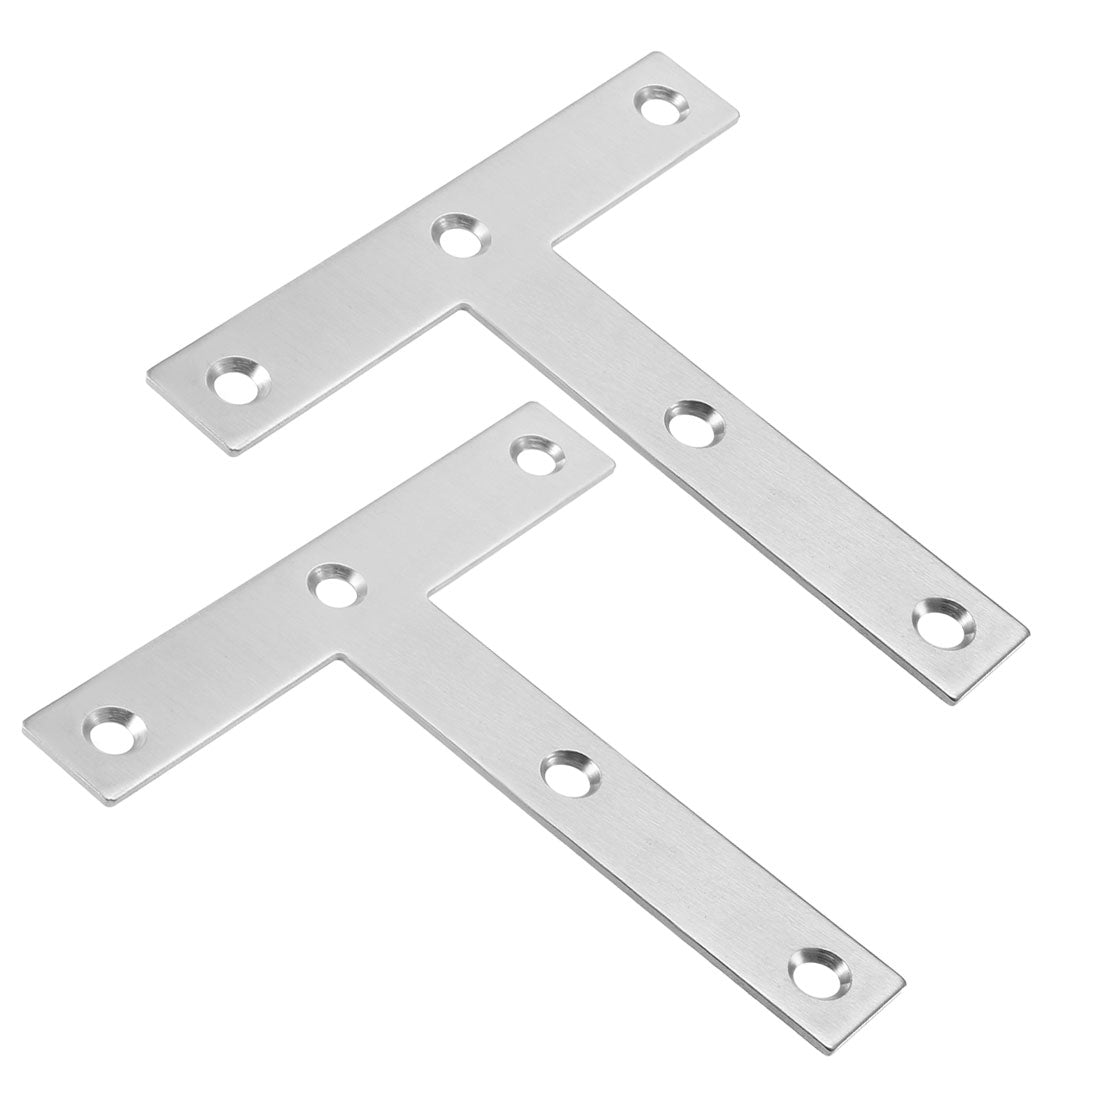 uxcell Uxcell Flat T Shape Repair Mending Plate, 120mmx120mm, Stainless steel Joining Bracket Support Brace, 2 Pcs